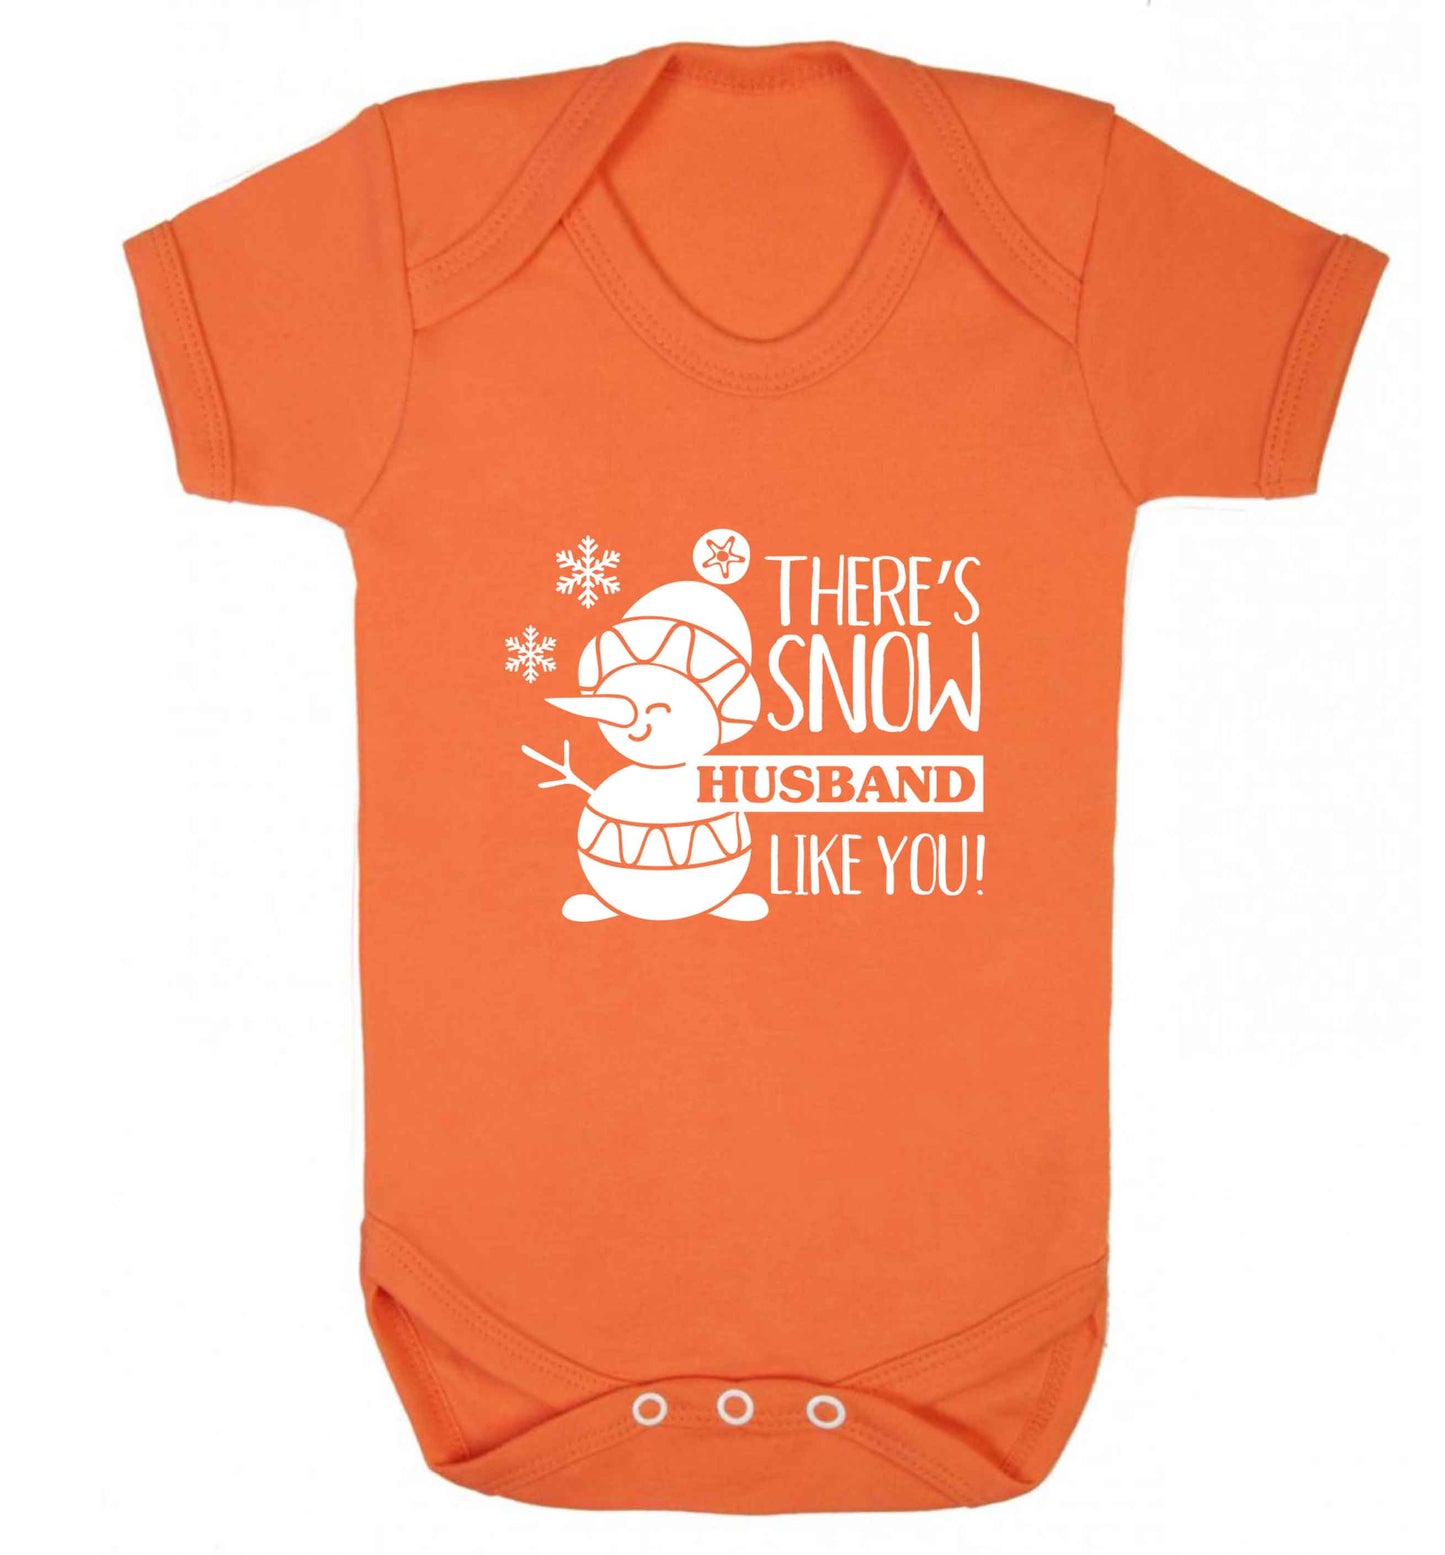 There's snow husband like you baby vest orange 18-24 months